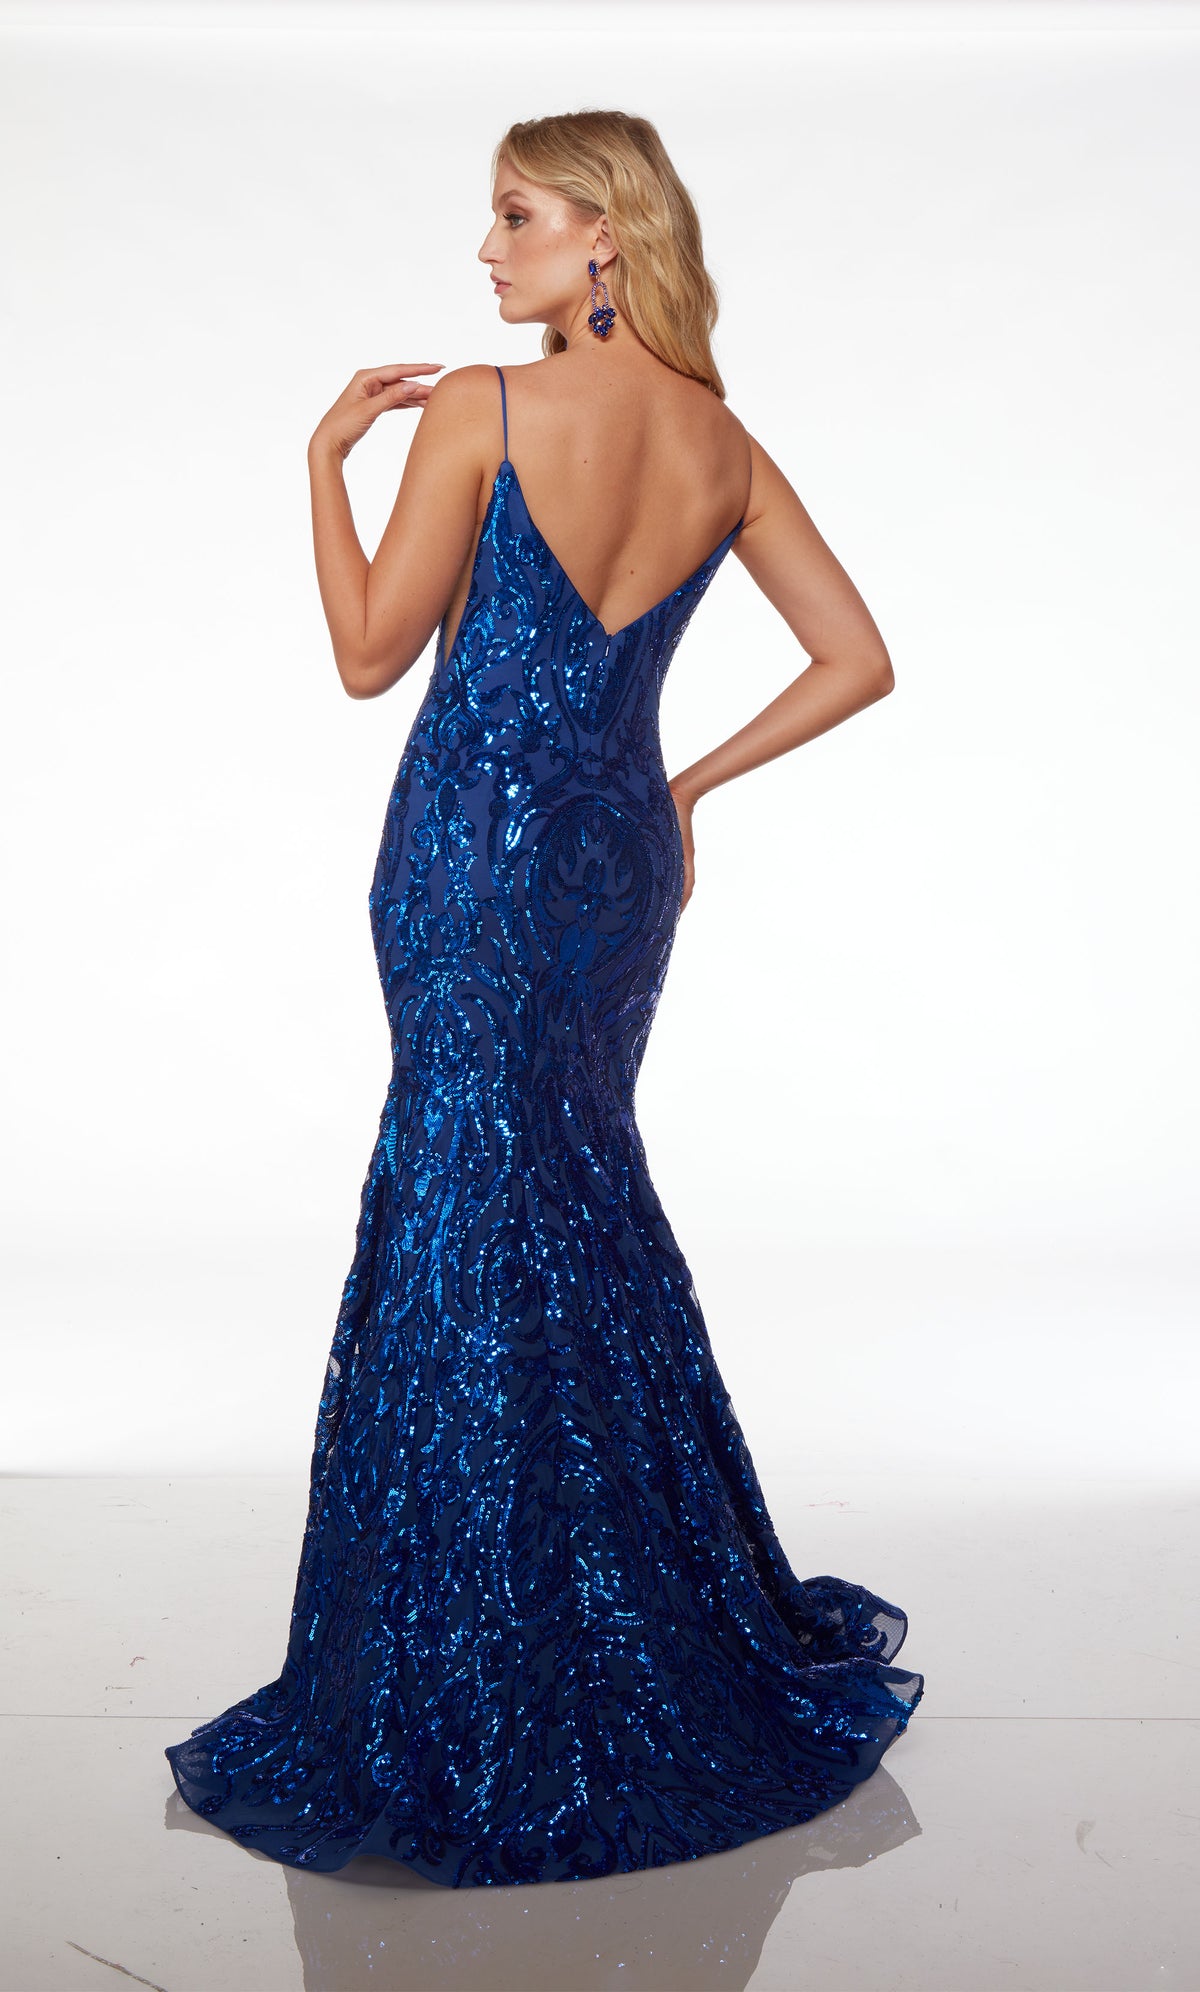 Elegant royal blue sparkly mermaid prom dress: plunging neckline, illusion cutouts, V-shaped open back—an dazzling and sophisticated ensemble.